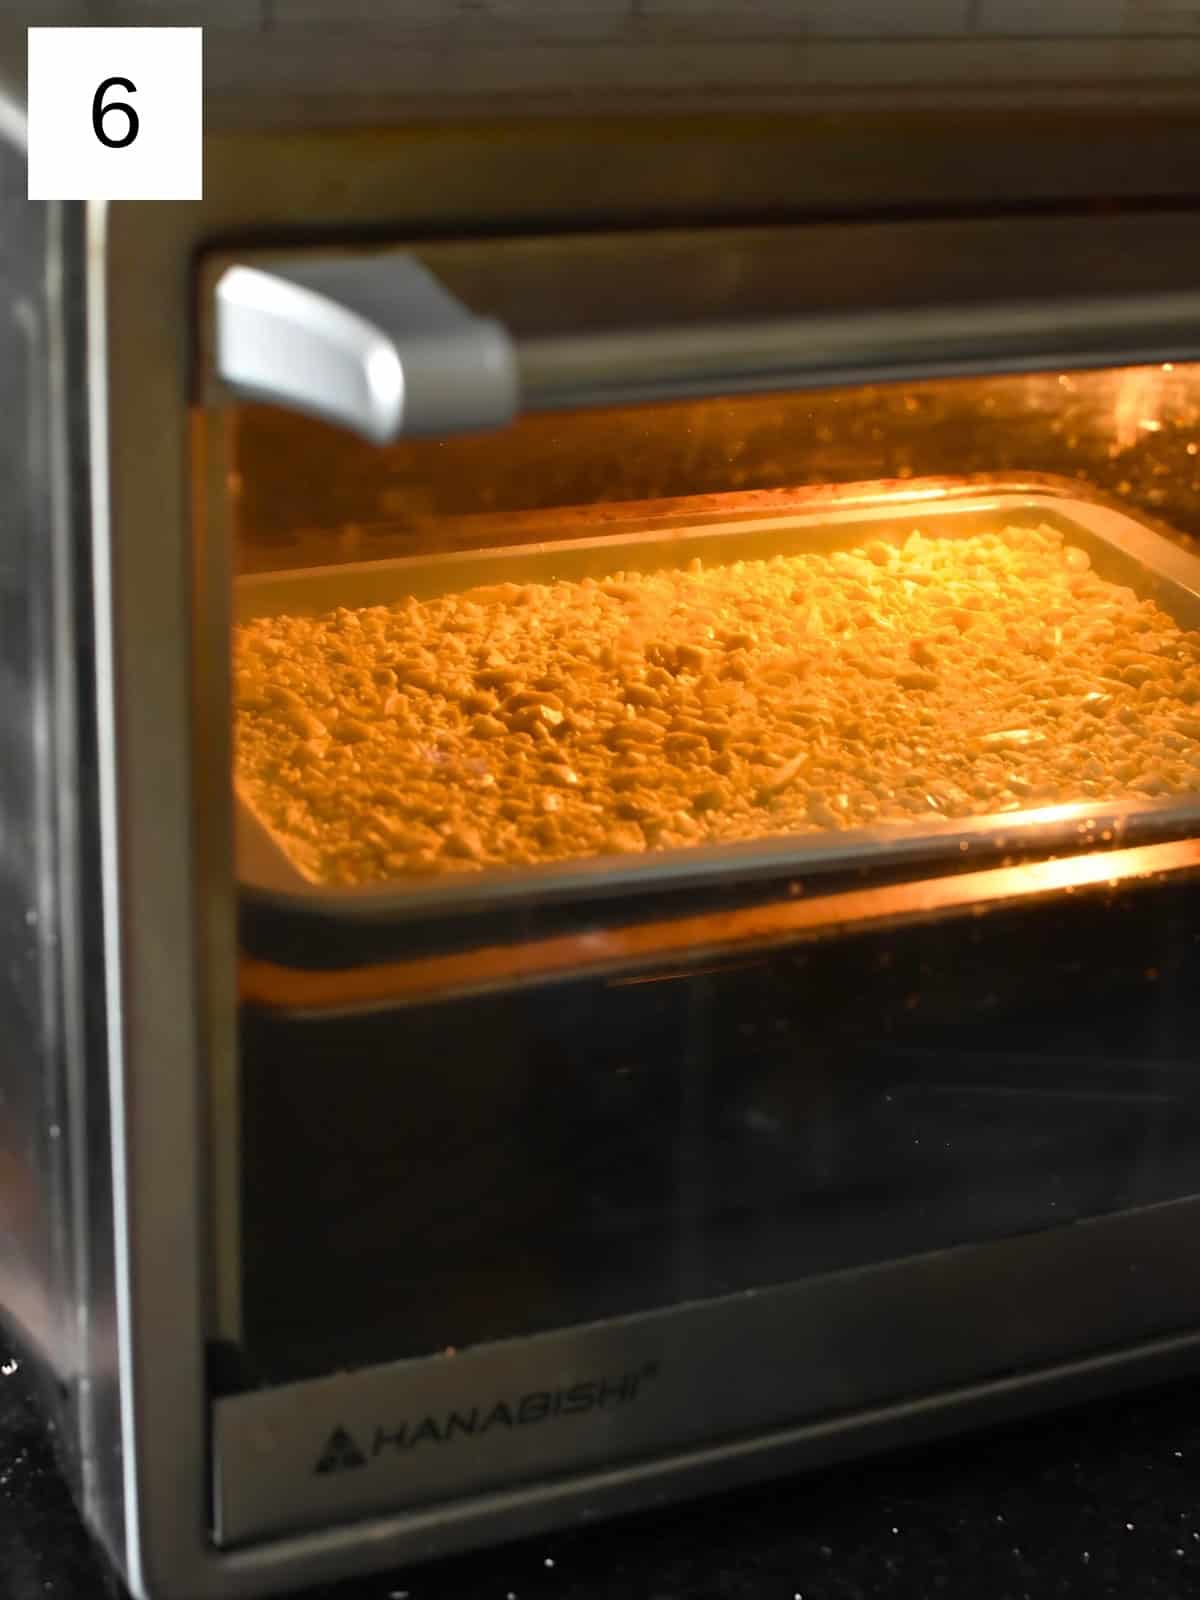 Diced white chocolates being baked in an oven.